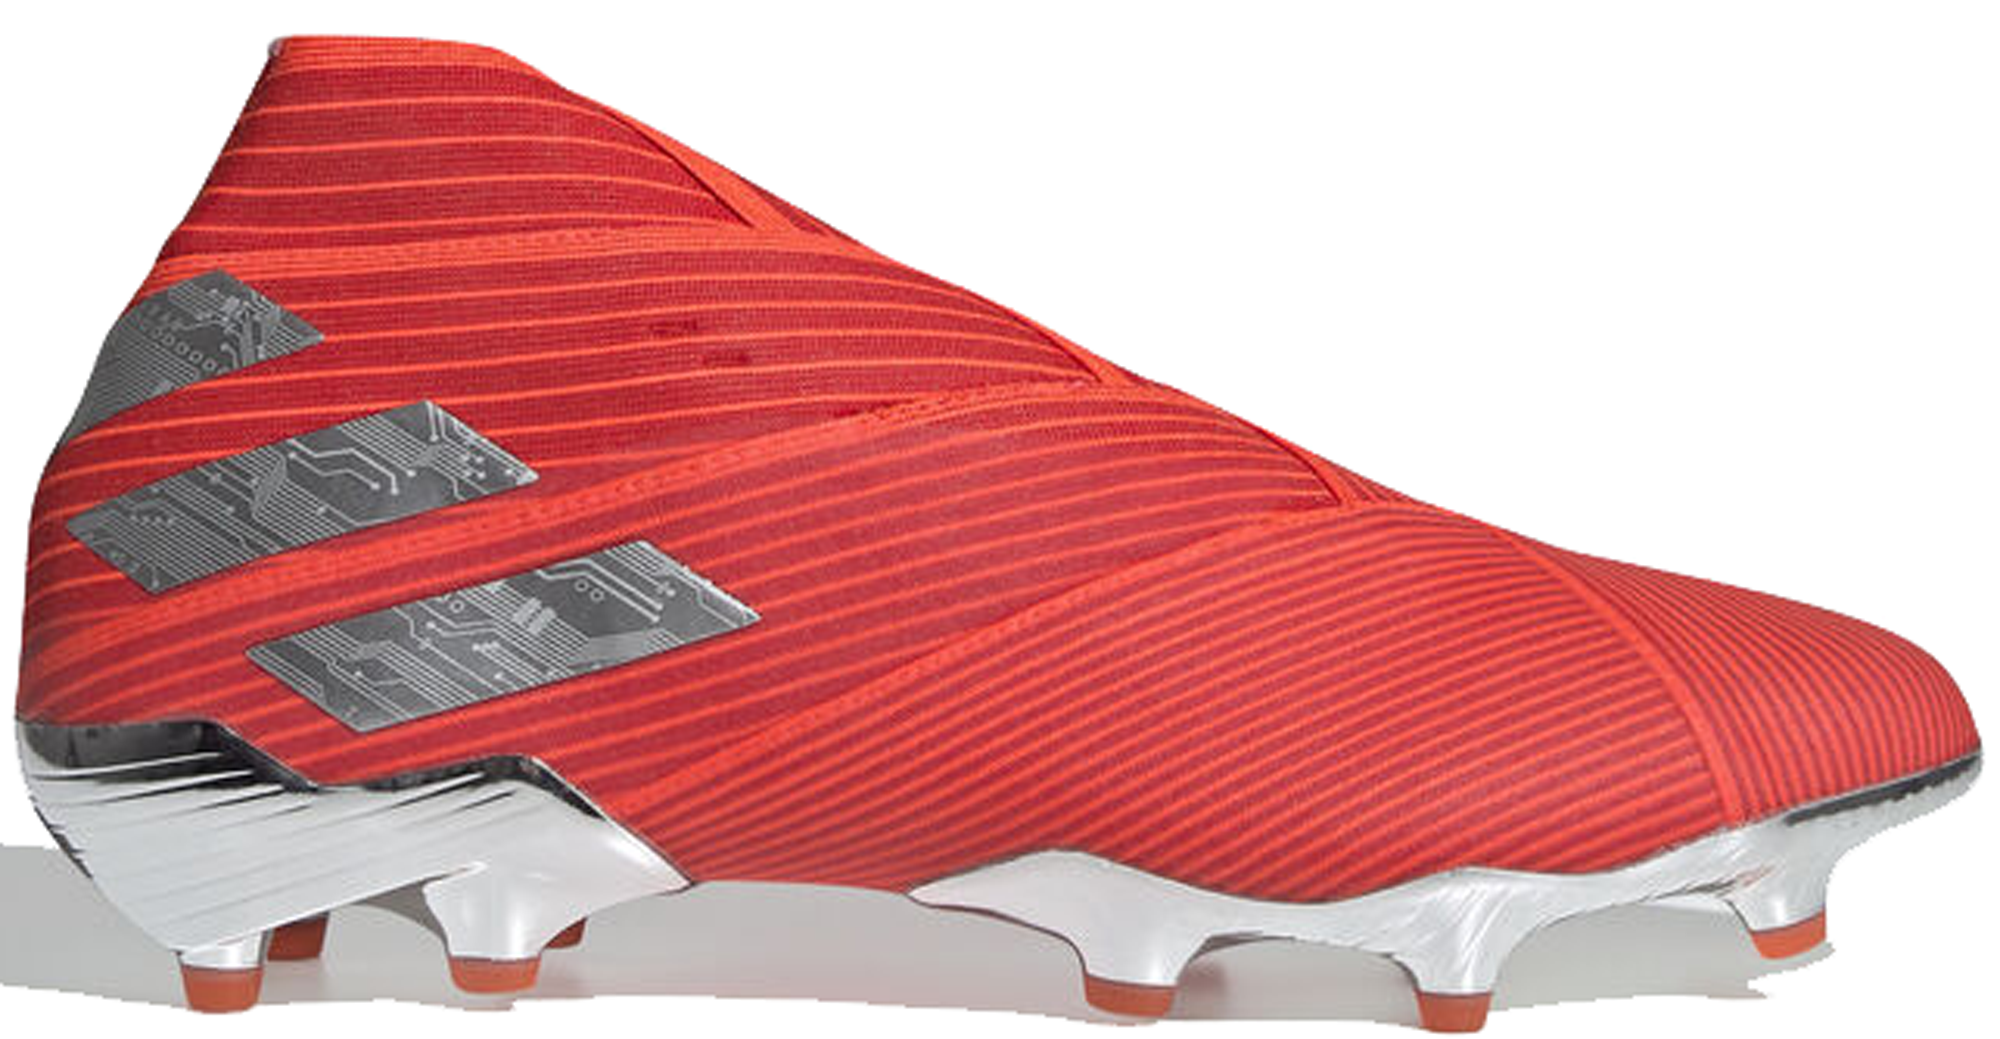 adidas 19 soccer cleats